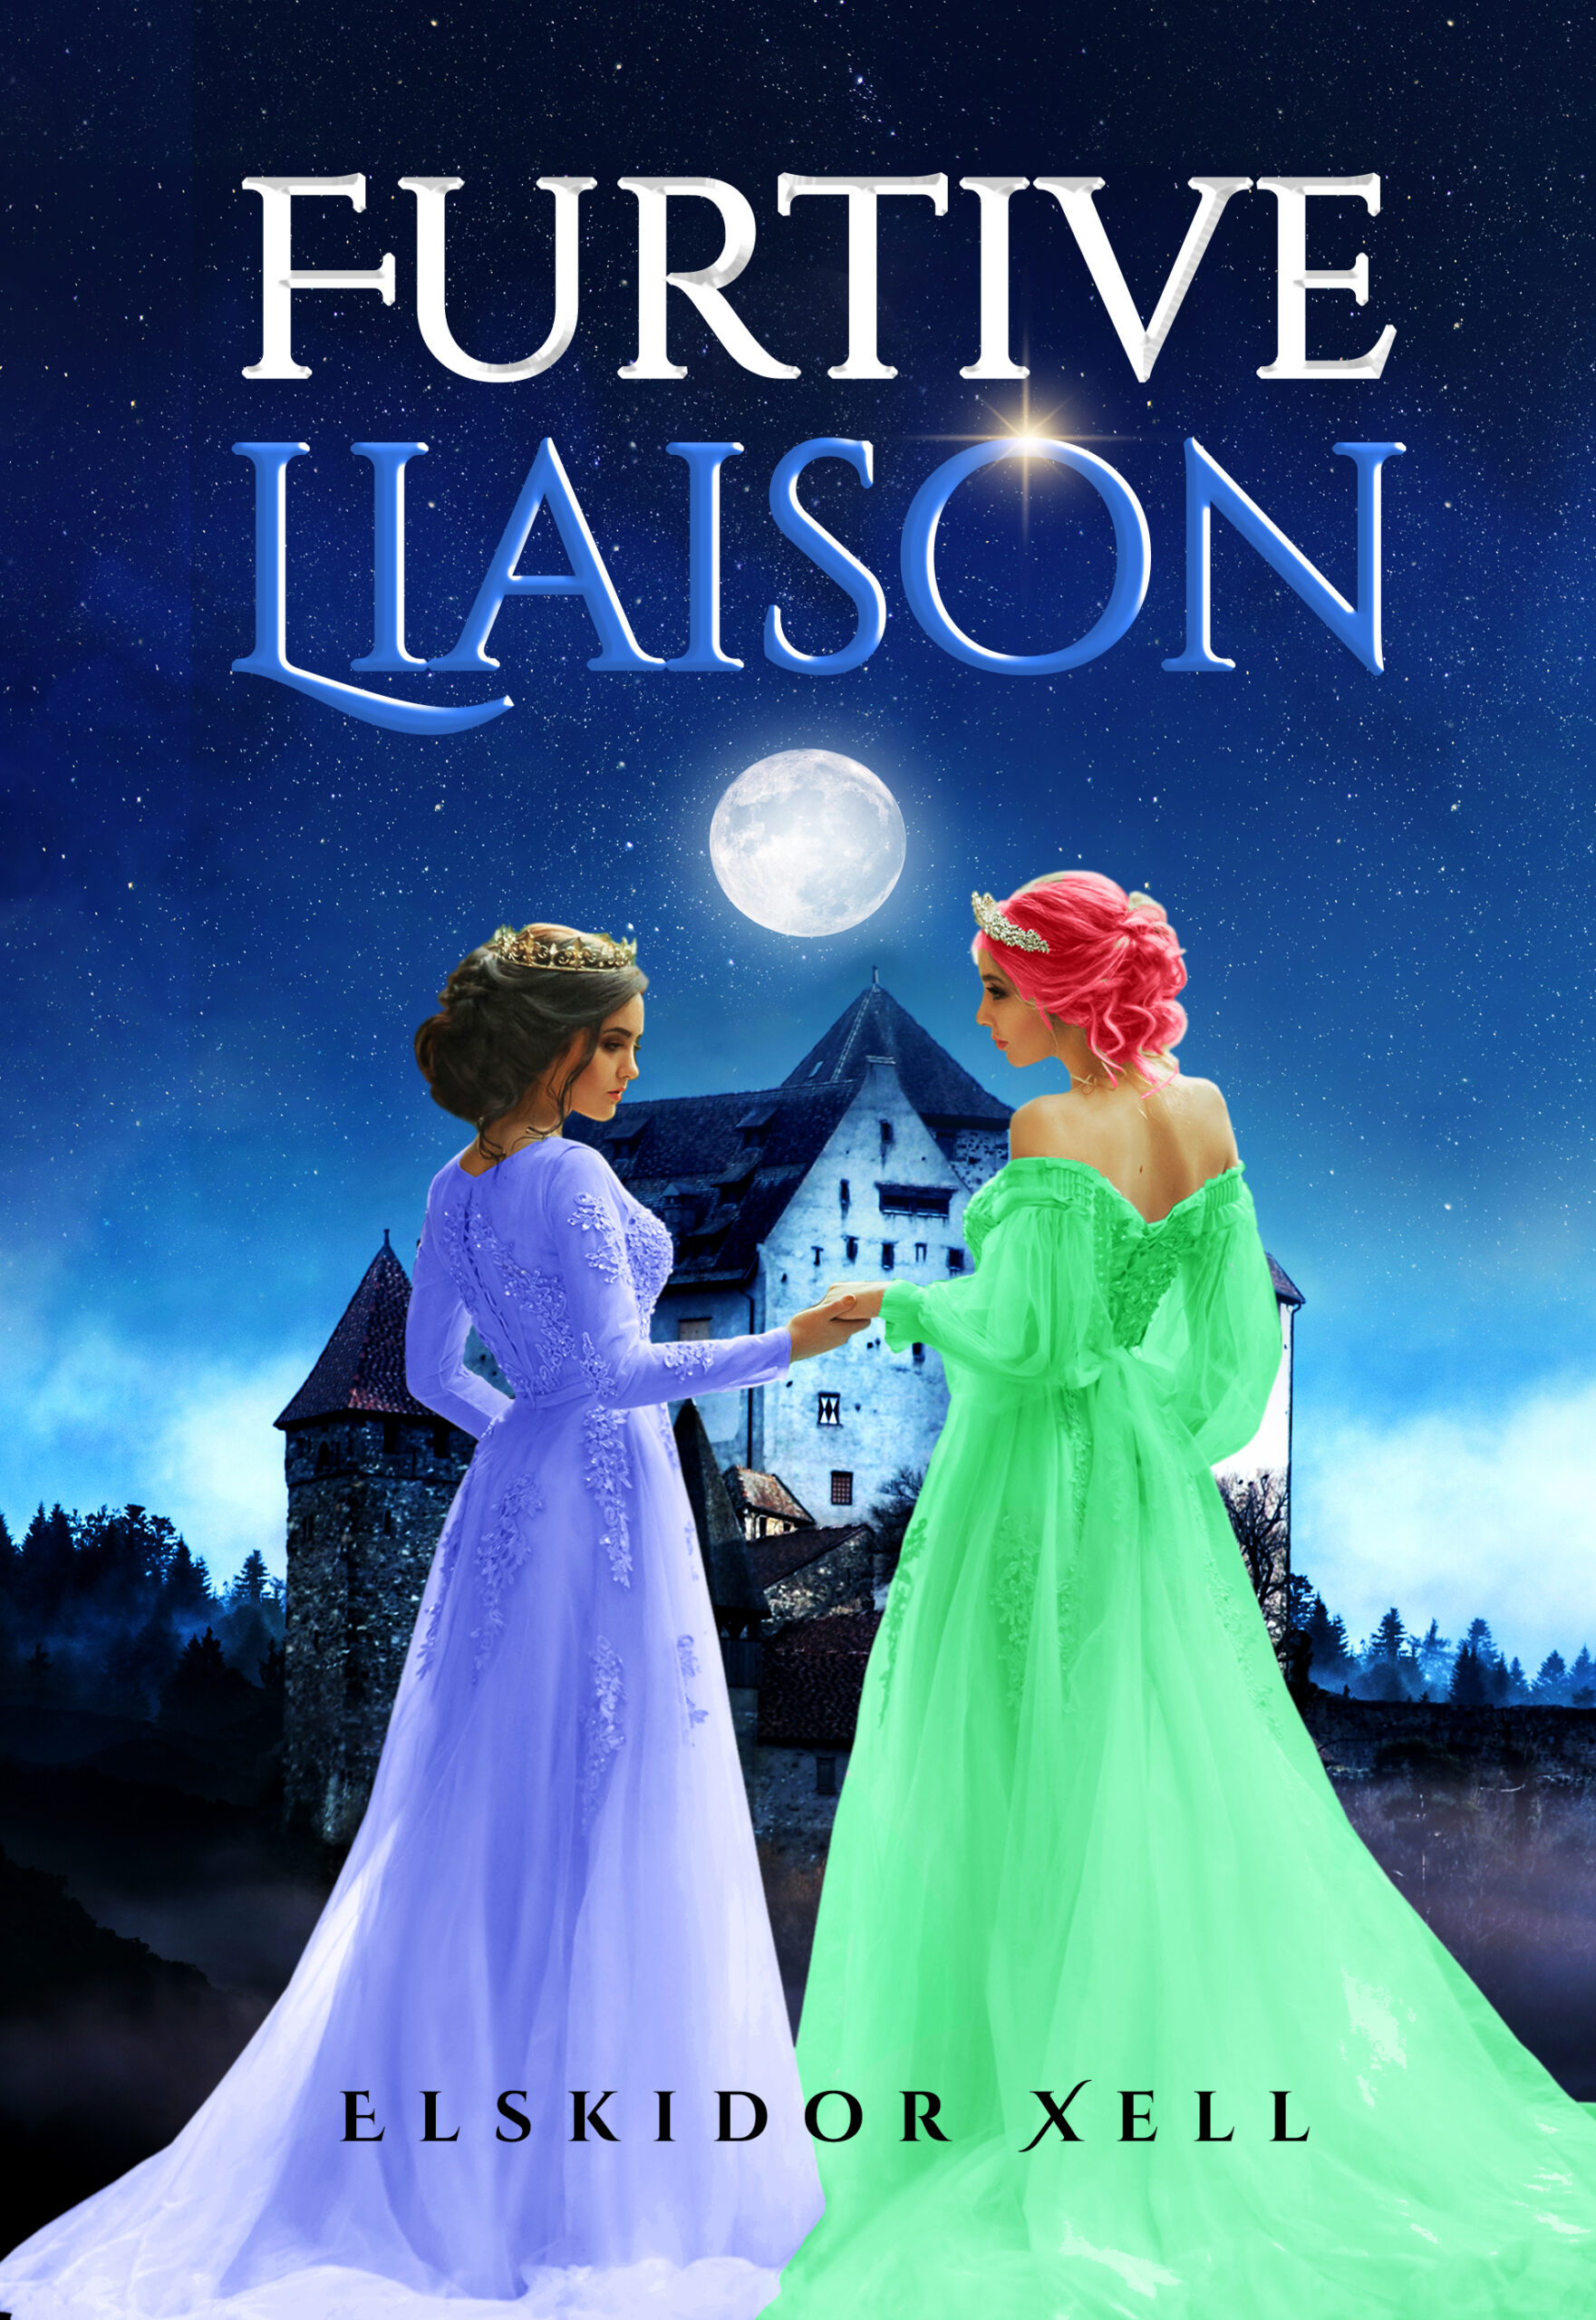 FREE: Furtive Liaison by Elskidor Xell